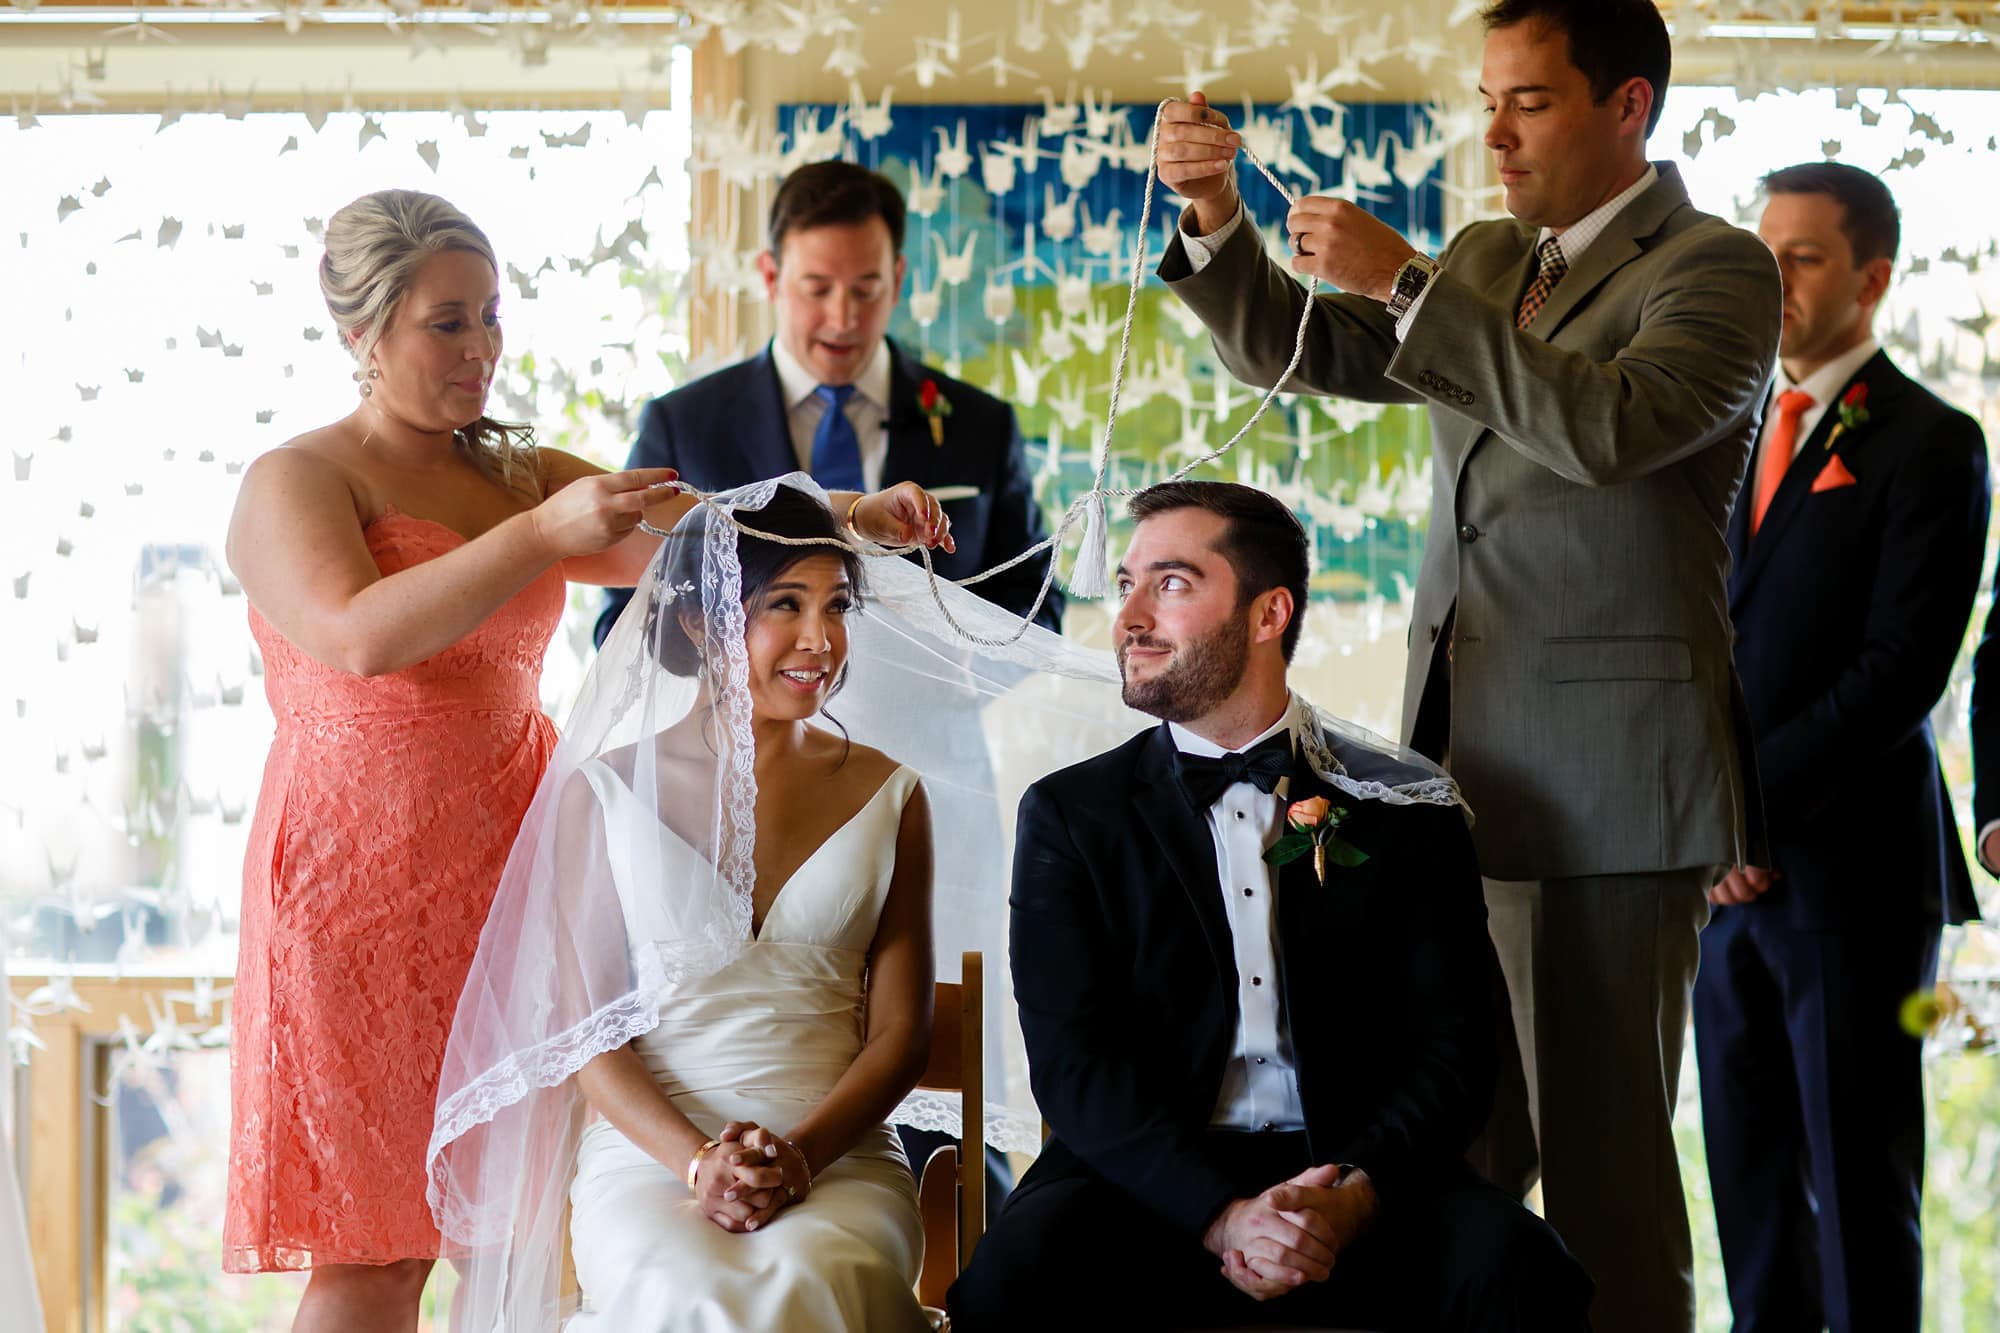 Bryan and Megan participate in the veil and cord ceremony during their Rembrandt Yard wedding